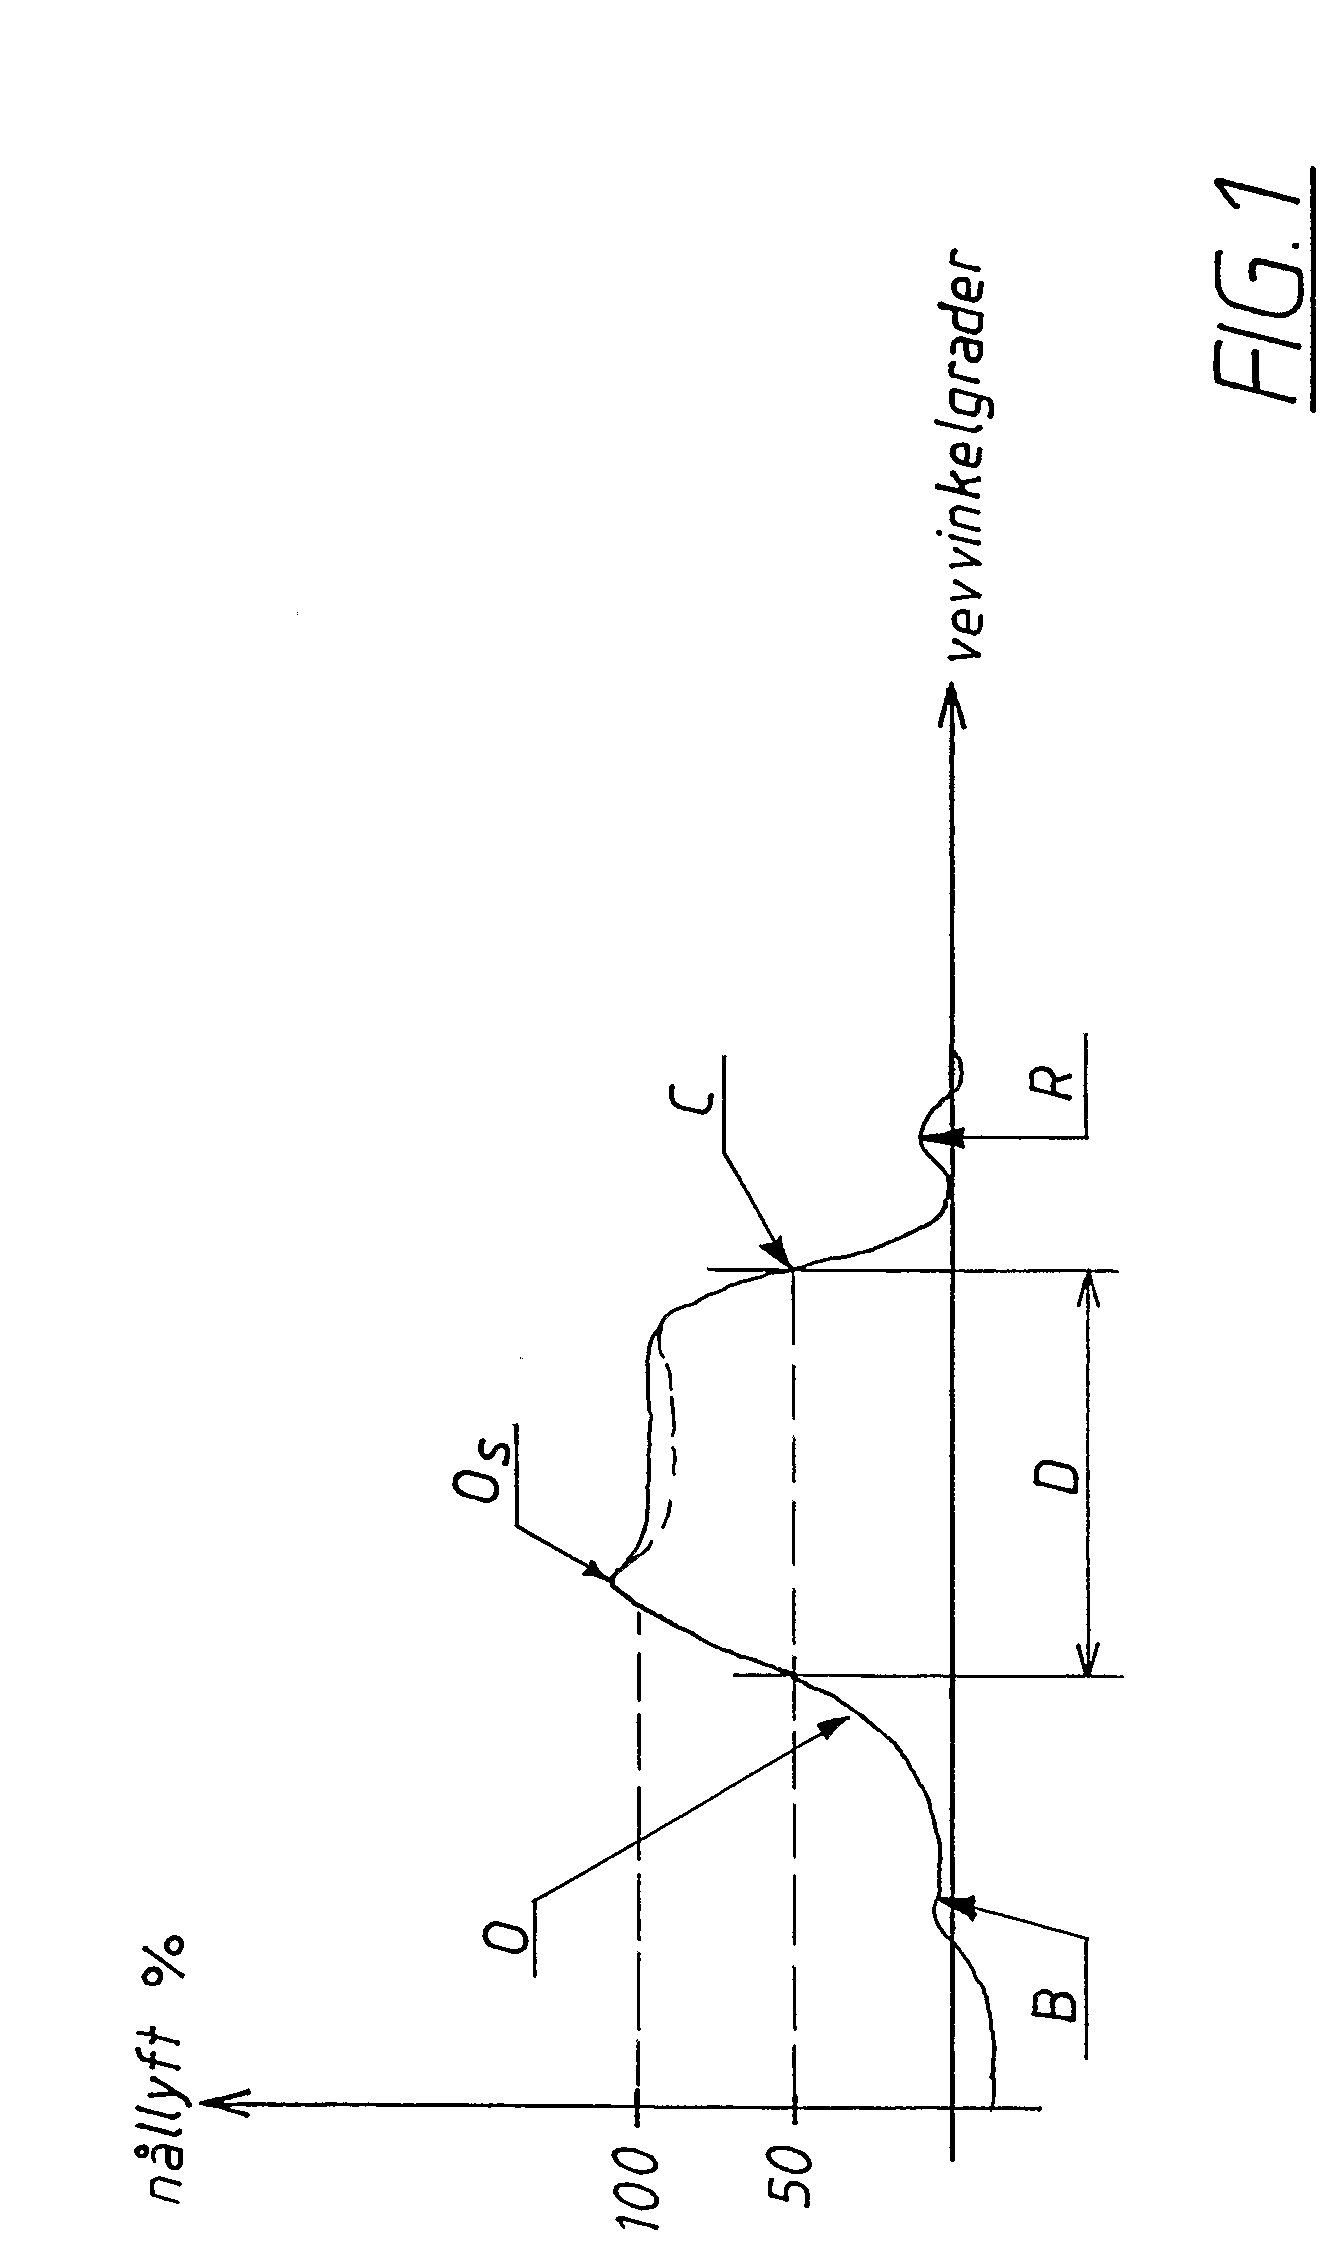 Diesel-type piston engine and a method for controlling a diesel-type piston engine